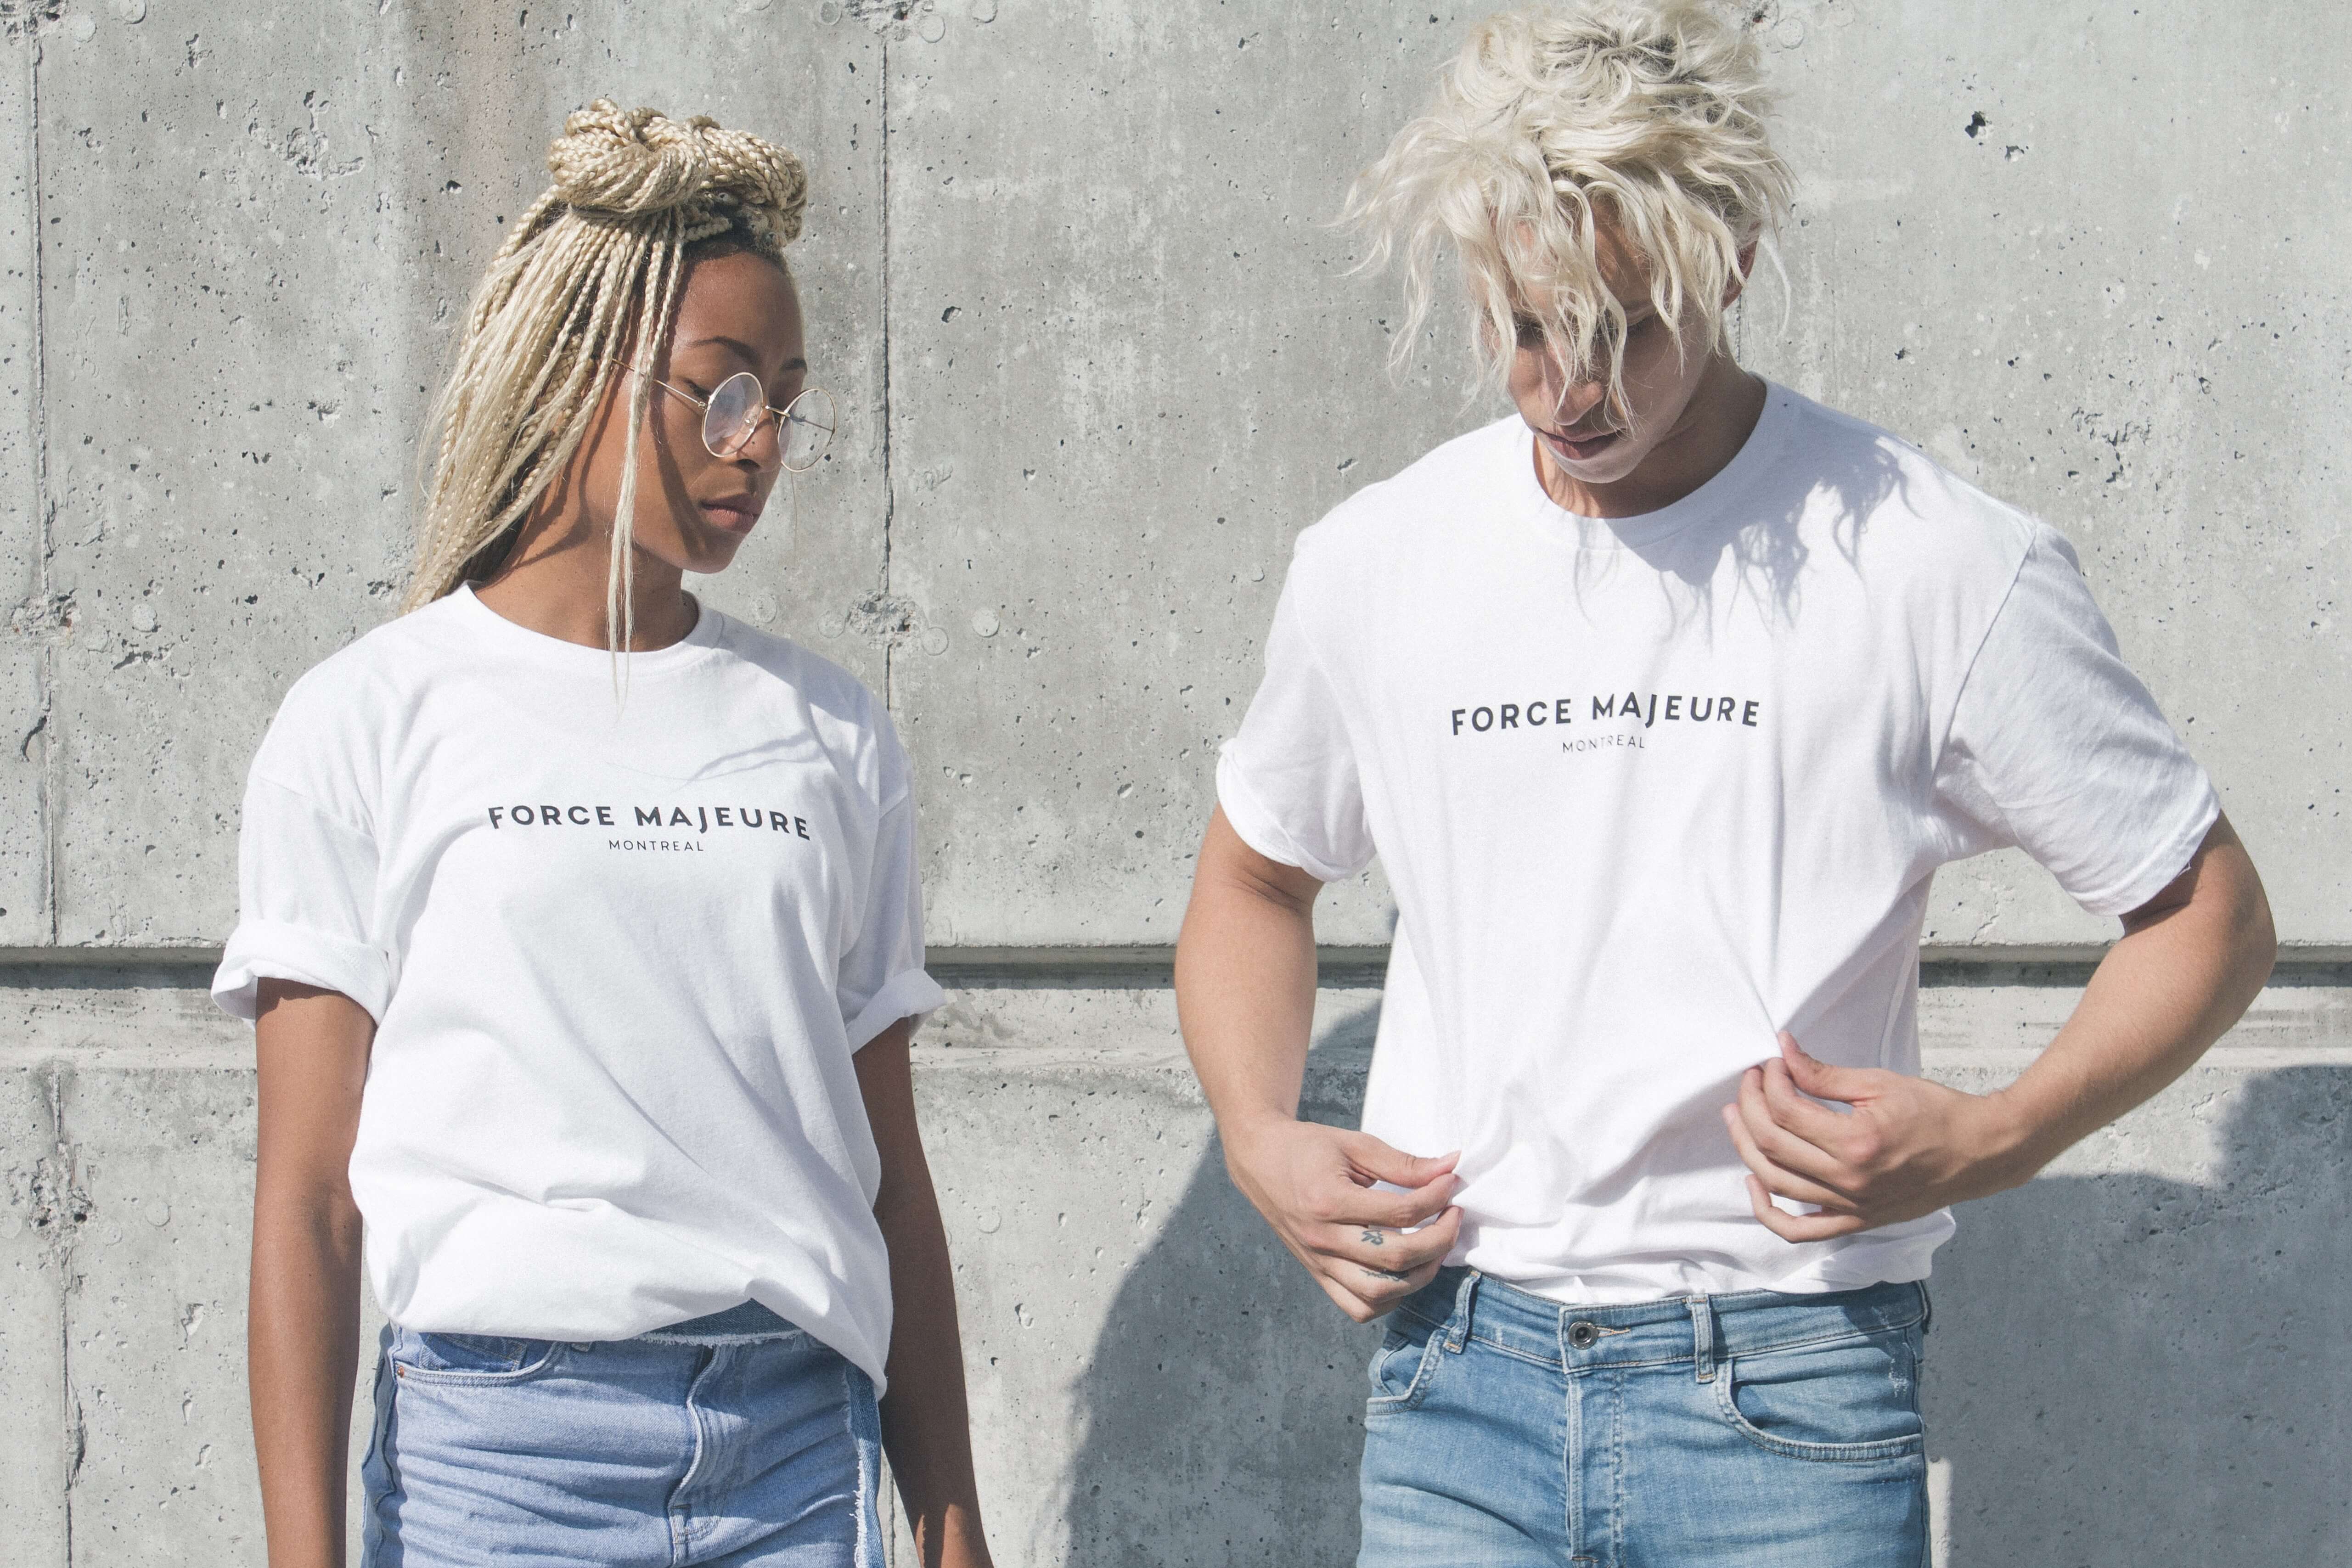 Two models wearing Force Majeure Montreal T-shirts